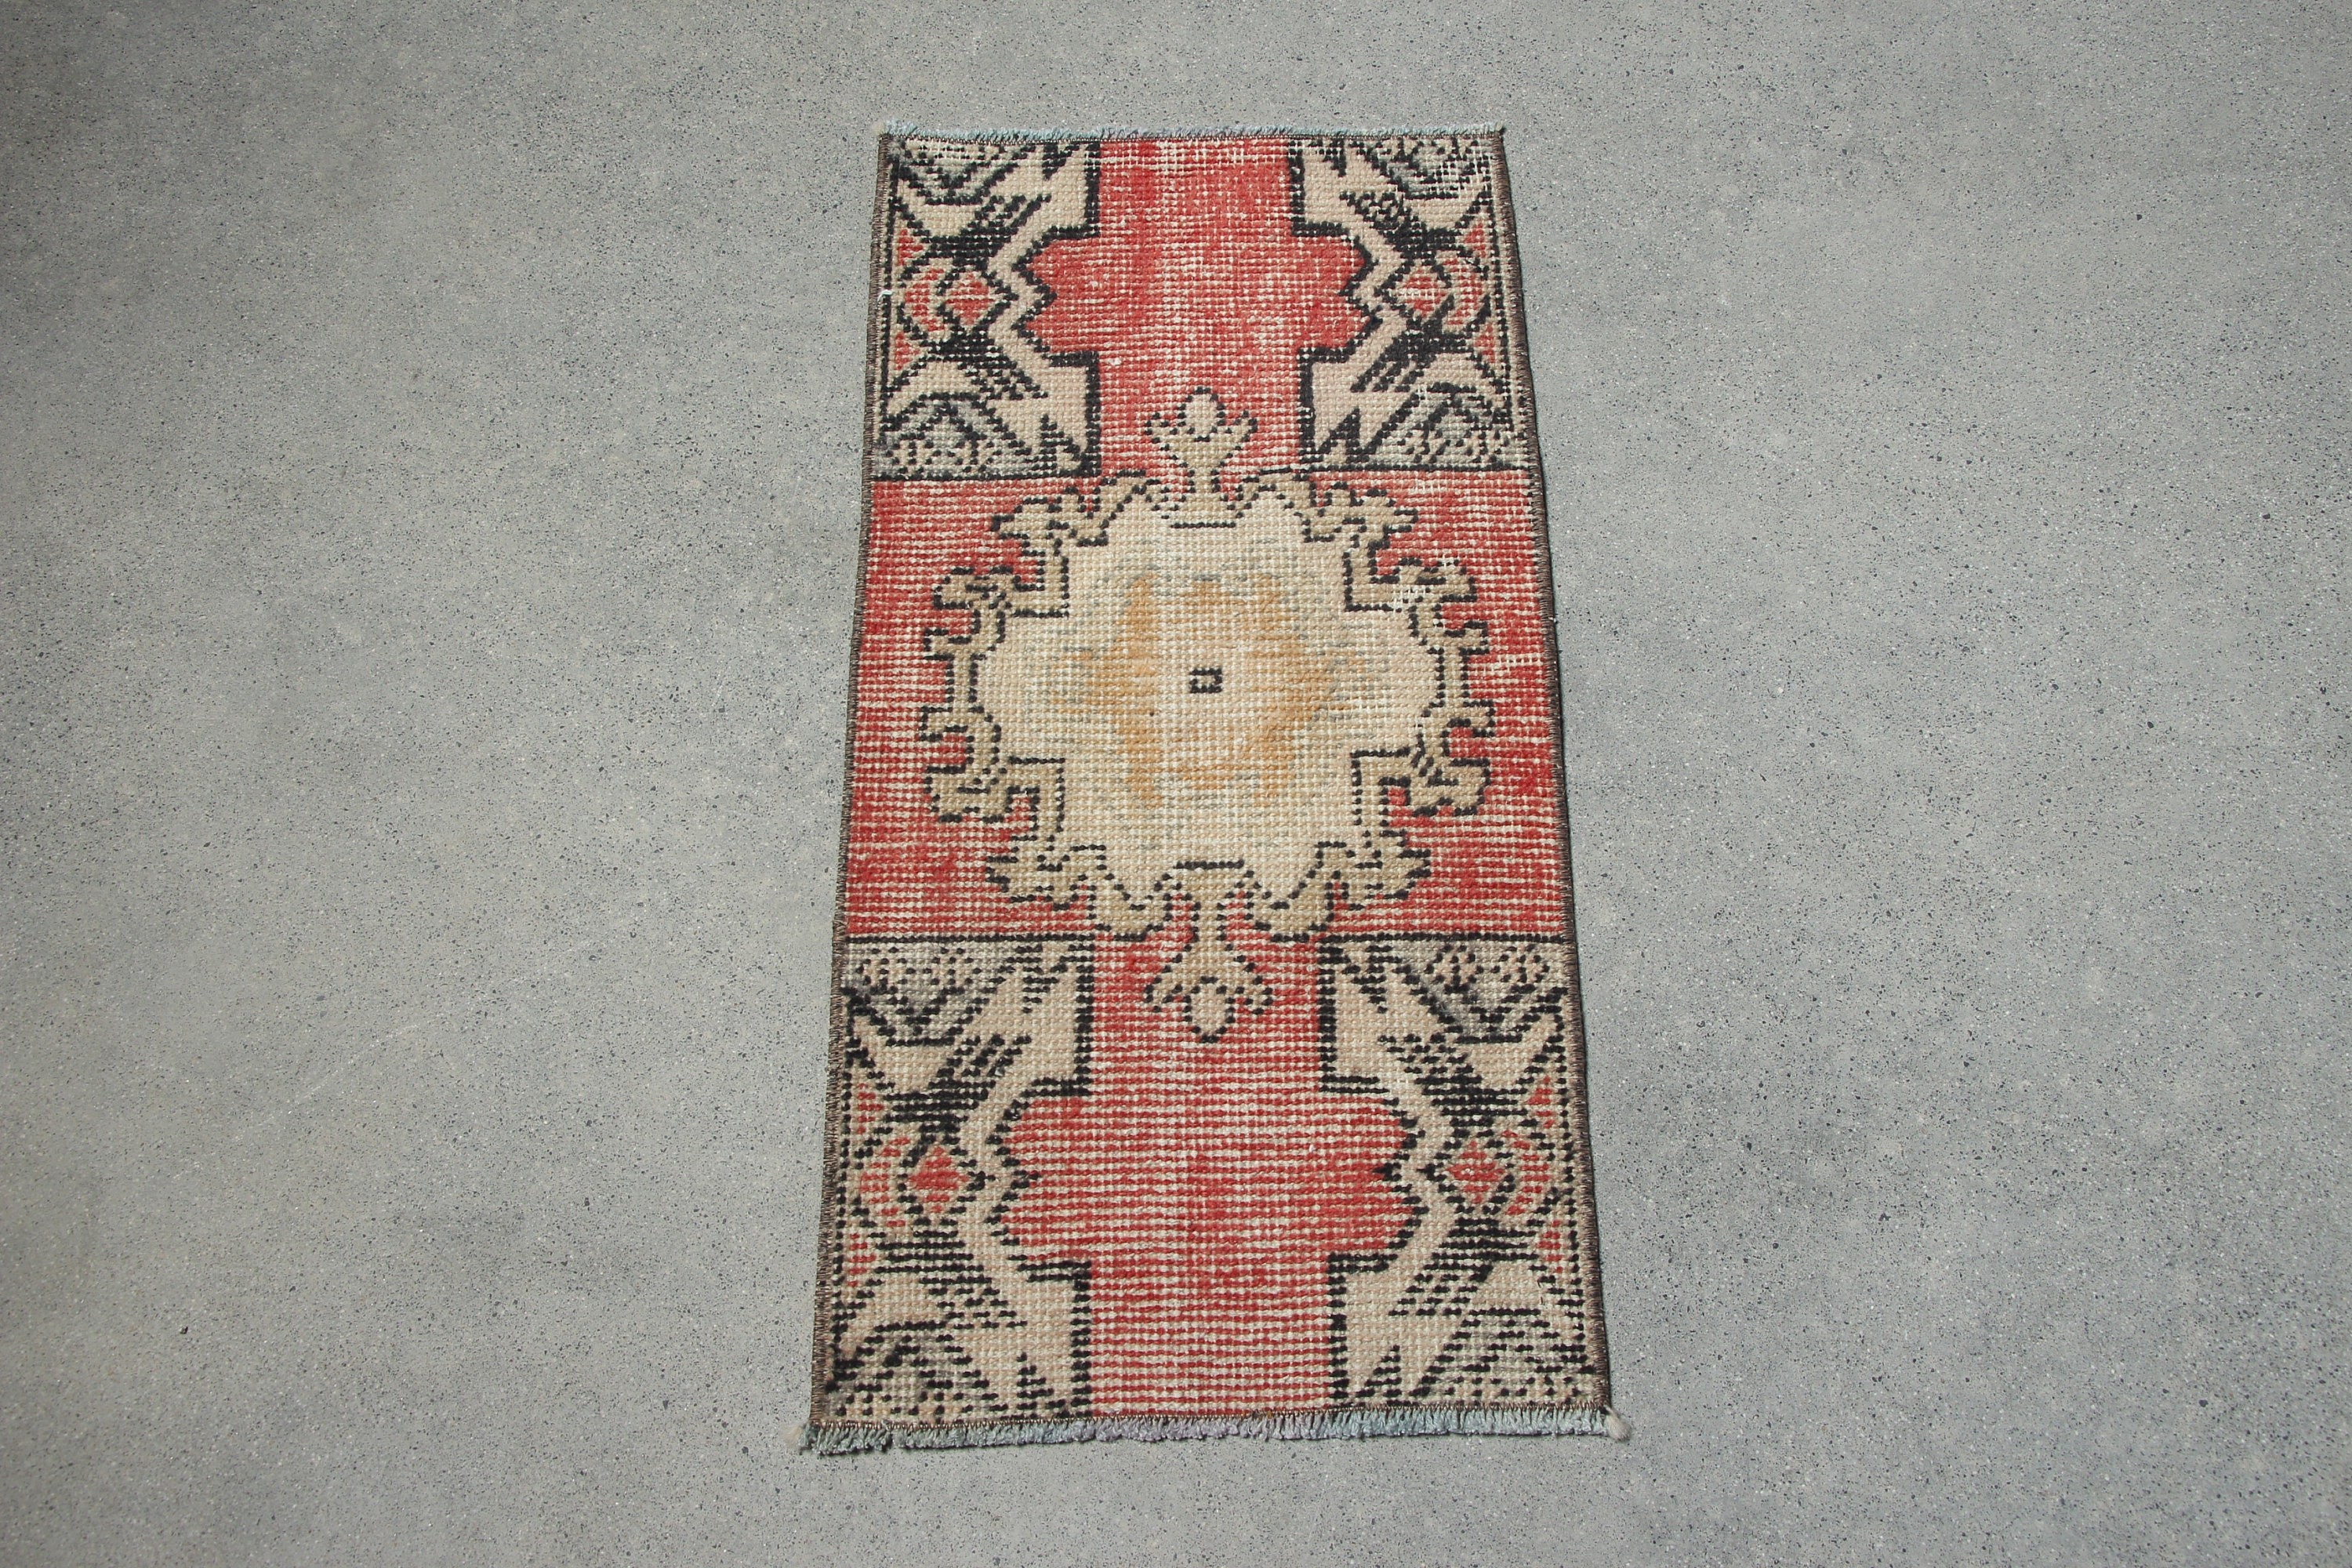 Moroccan Rug, Wall Hanging Rugs, Vintage Rug, Red Antique Rugs, Anatolian Rug, Retro Rugs, Turkish Rugs, Entry Rug, 1.3x2.6 ft Small Rugs